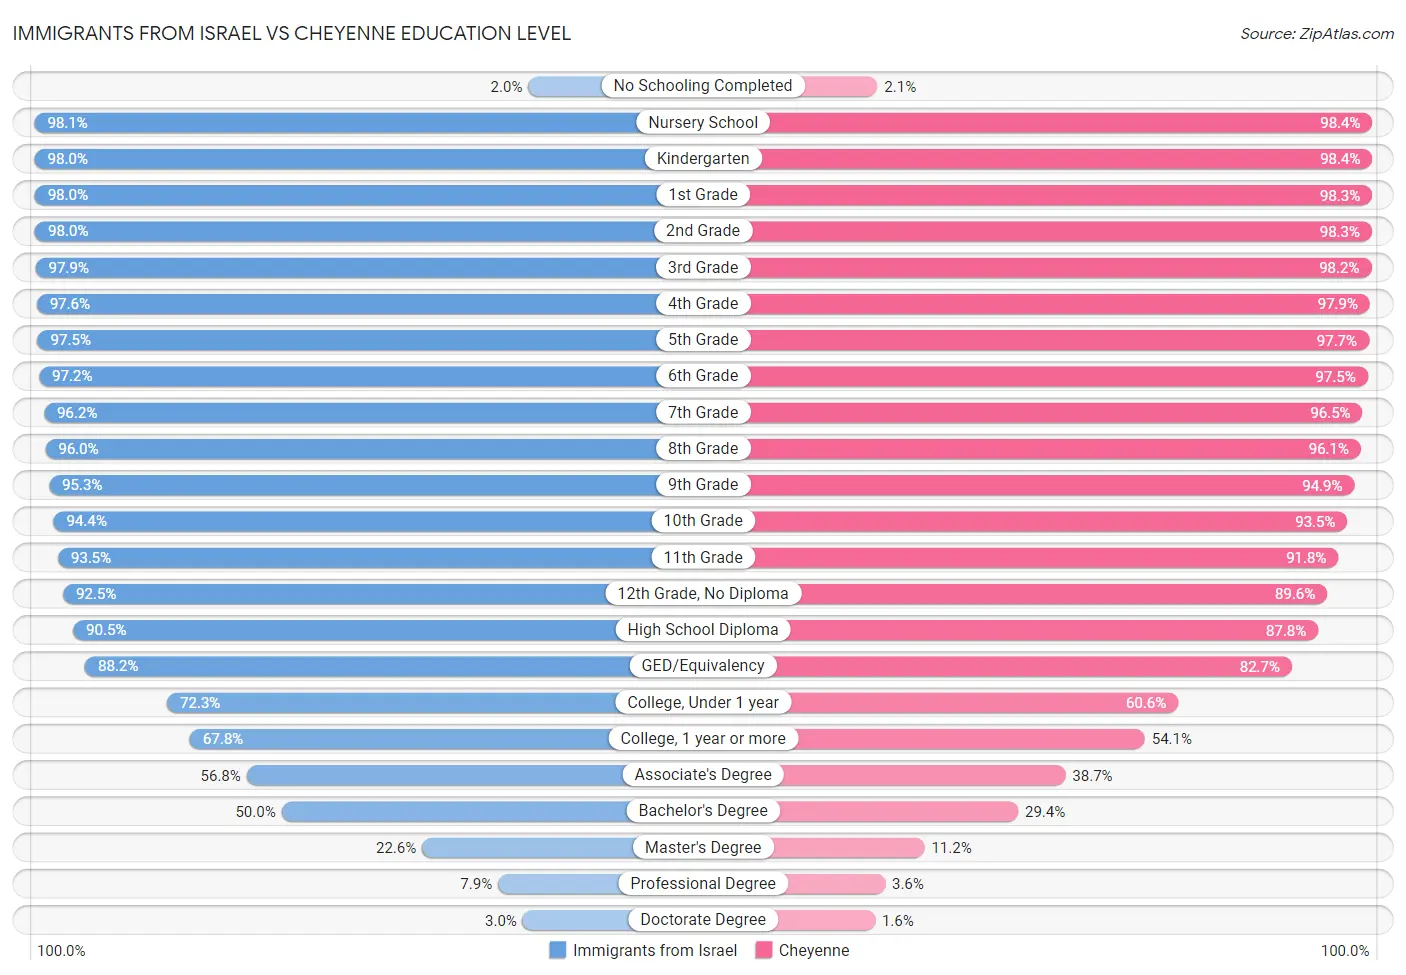 Immigrants from Israel vs Cheyenne Education Level